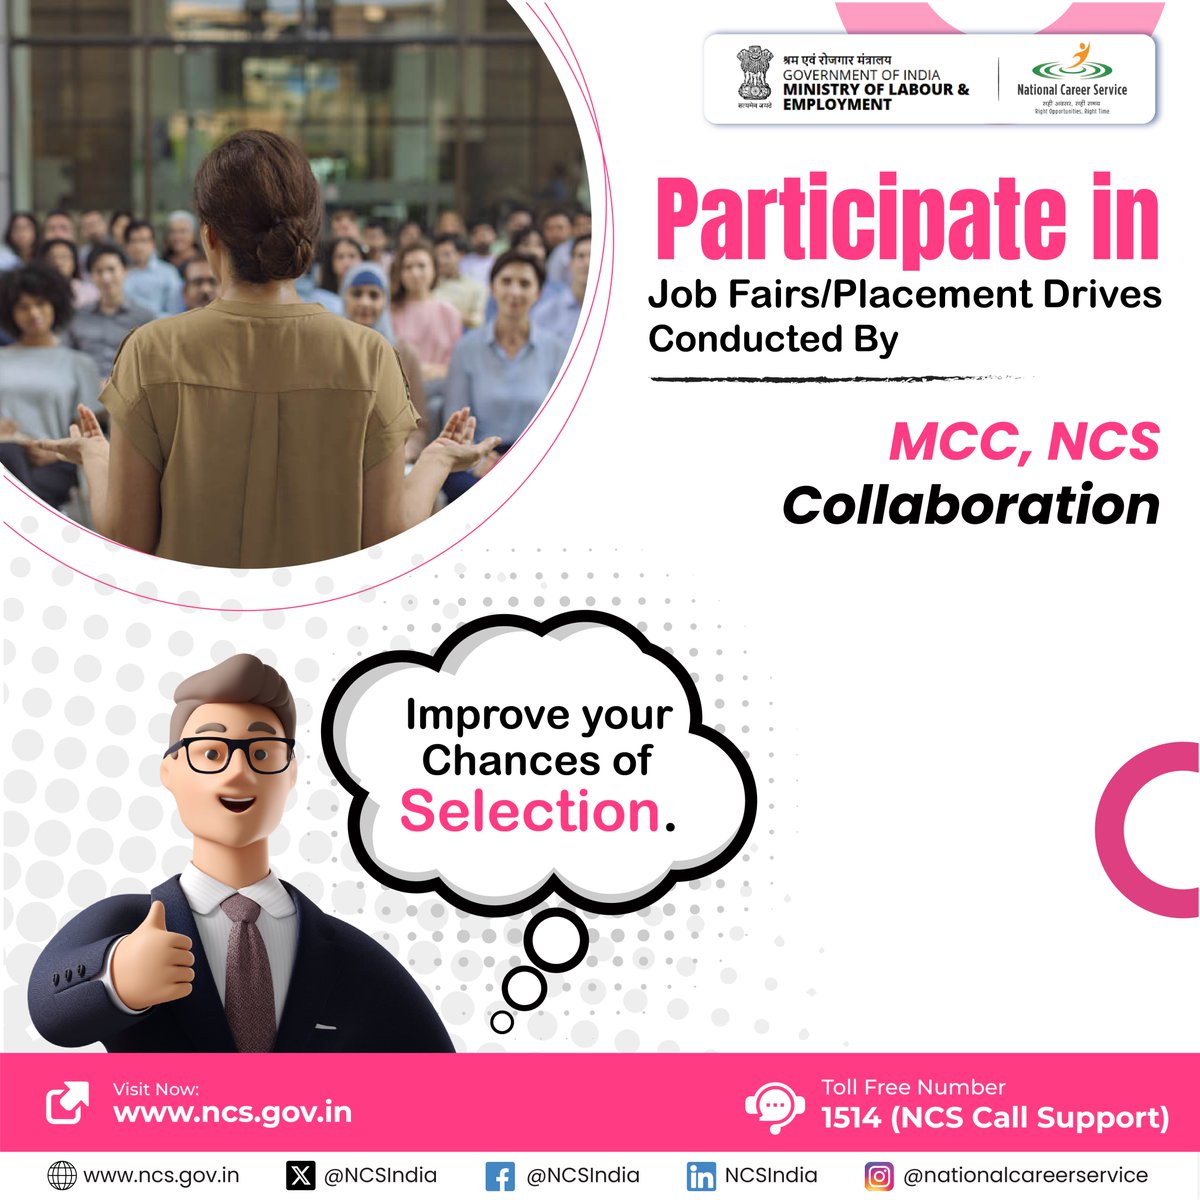 Get opportunities to participate in job fairs conducted by NCS in collaboration with your nearest MCC.

But first, register on the portal.

@LabourMinistry @mygovindia

#jobs #CareerOpportunities #NCS #JobFair #RojgaarMela #NCSParRegisterKiyaKya